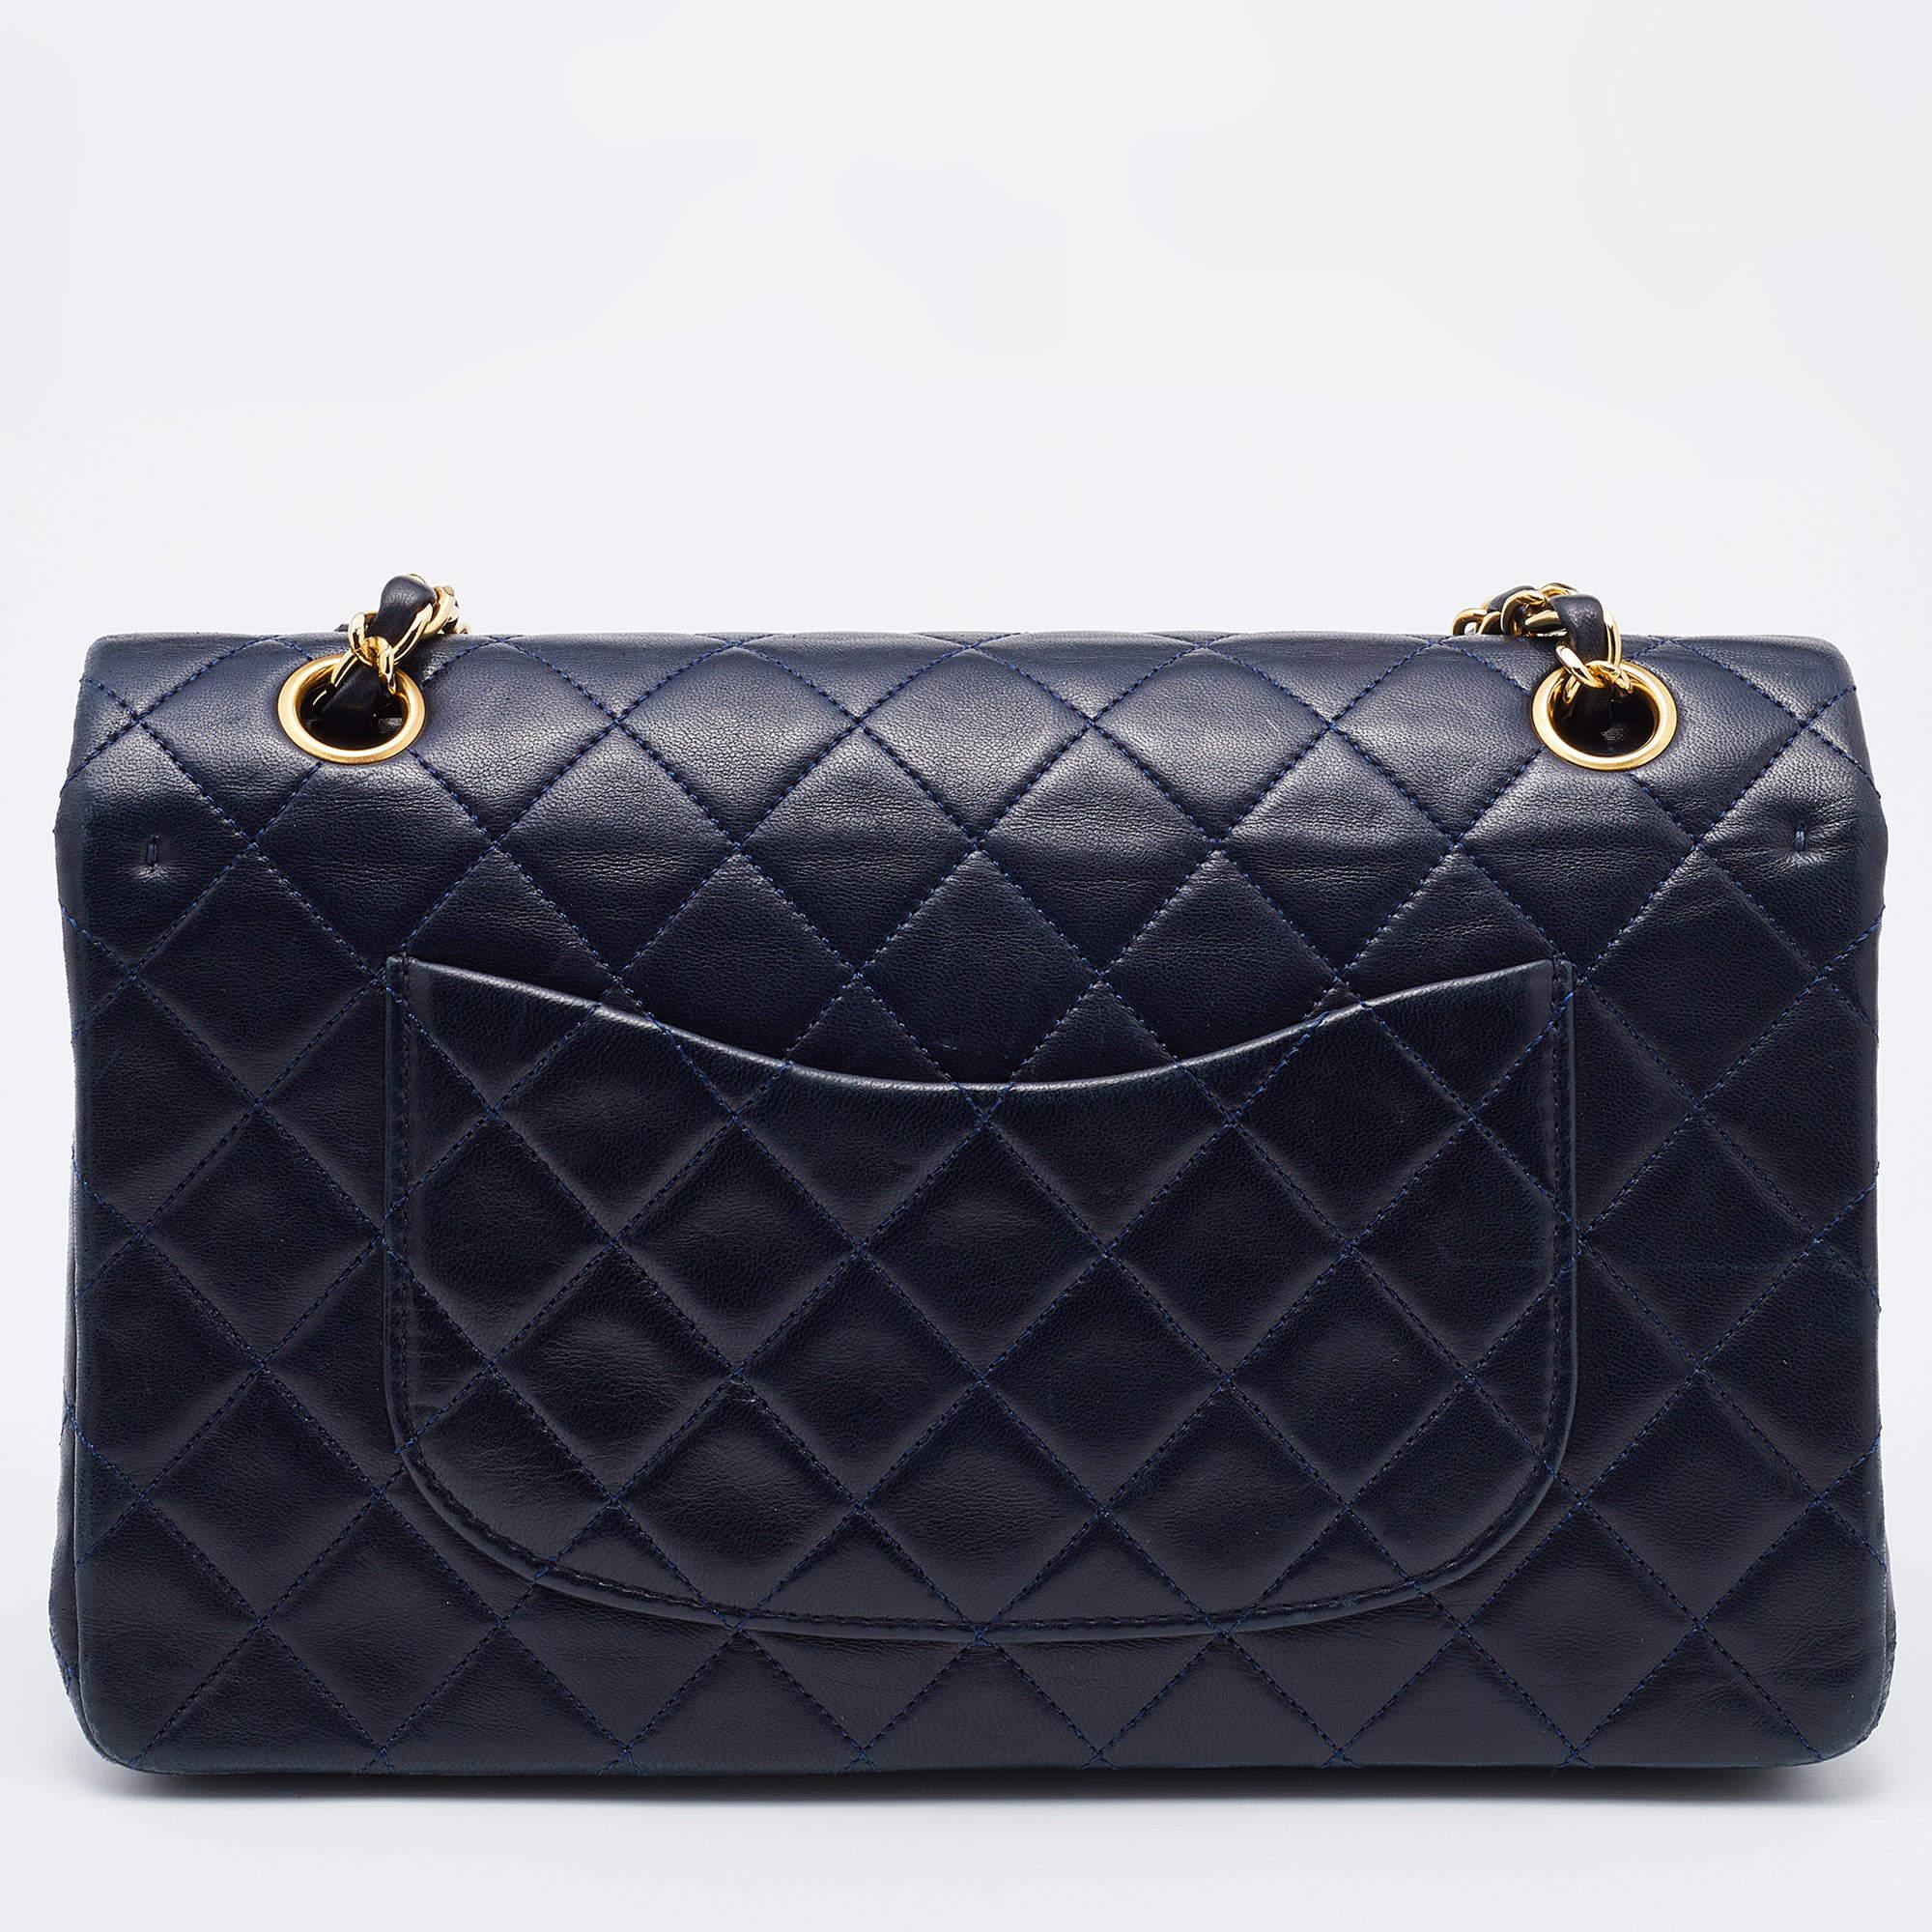 Chanel Navy Blue Quilted Leather Medium Classic Double Flap Bag 5